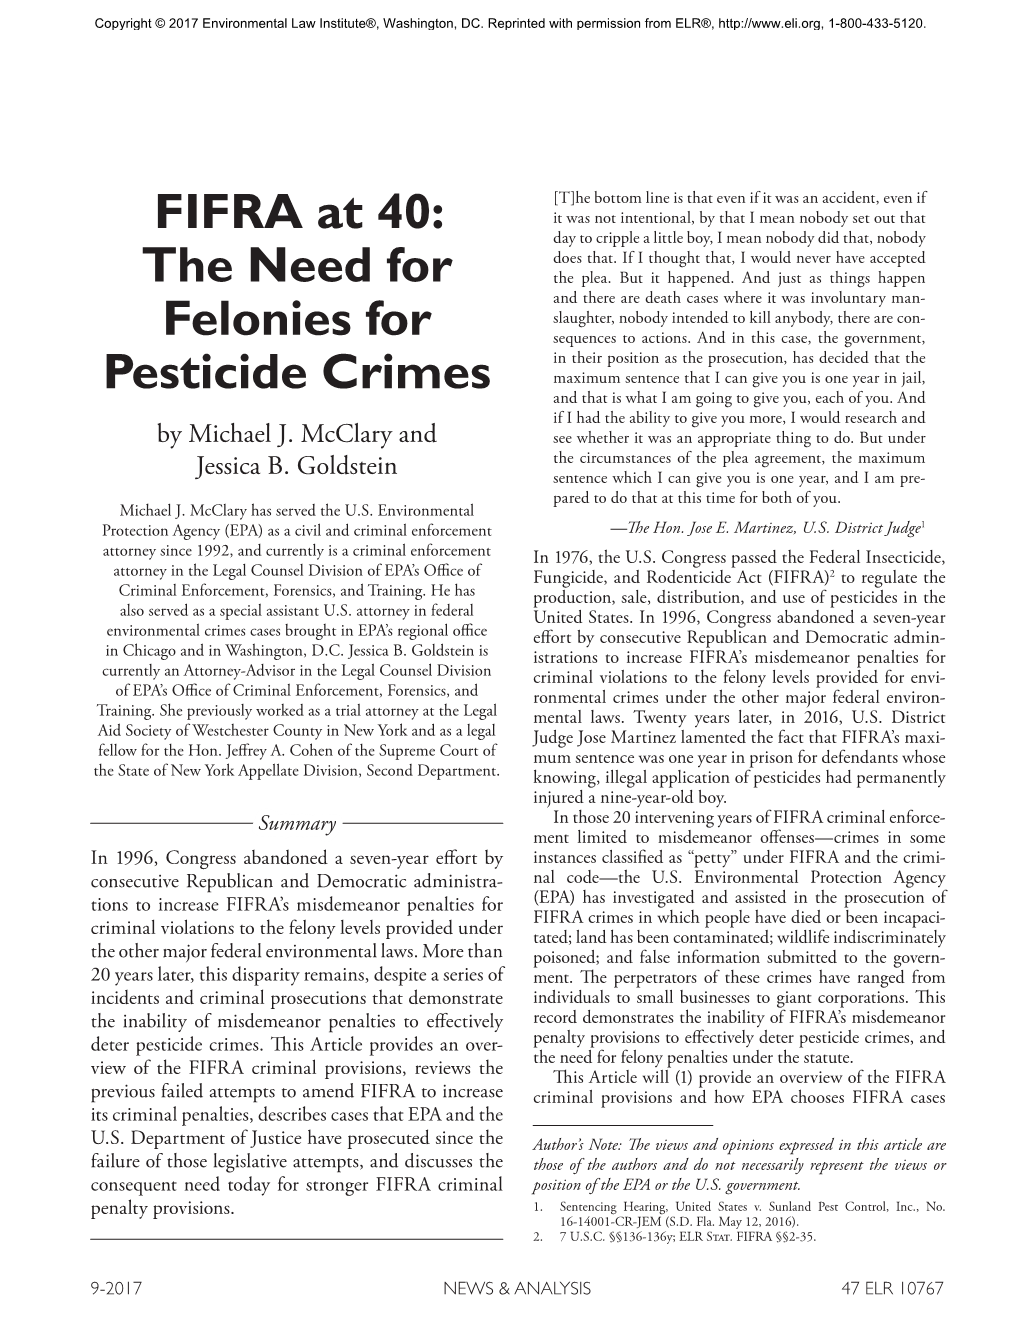 FIFRA at 40: the Need for Felonies for Pesticide Crimes